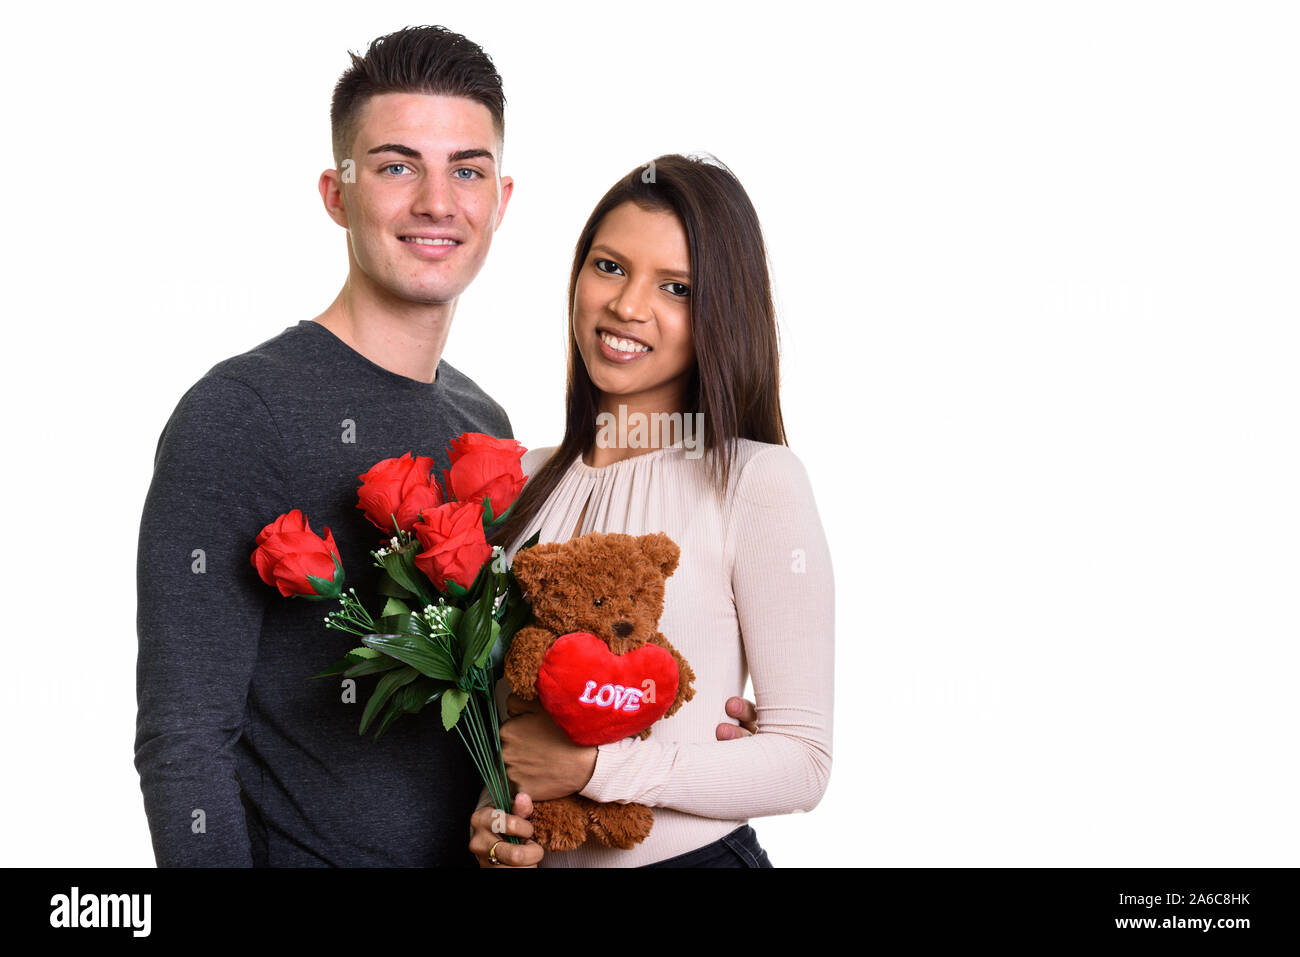 Young happy couple smiling while holding roses rouges et teddy bea Banque D'Images